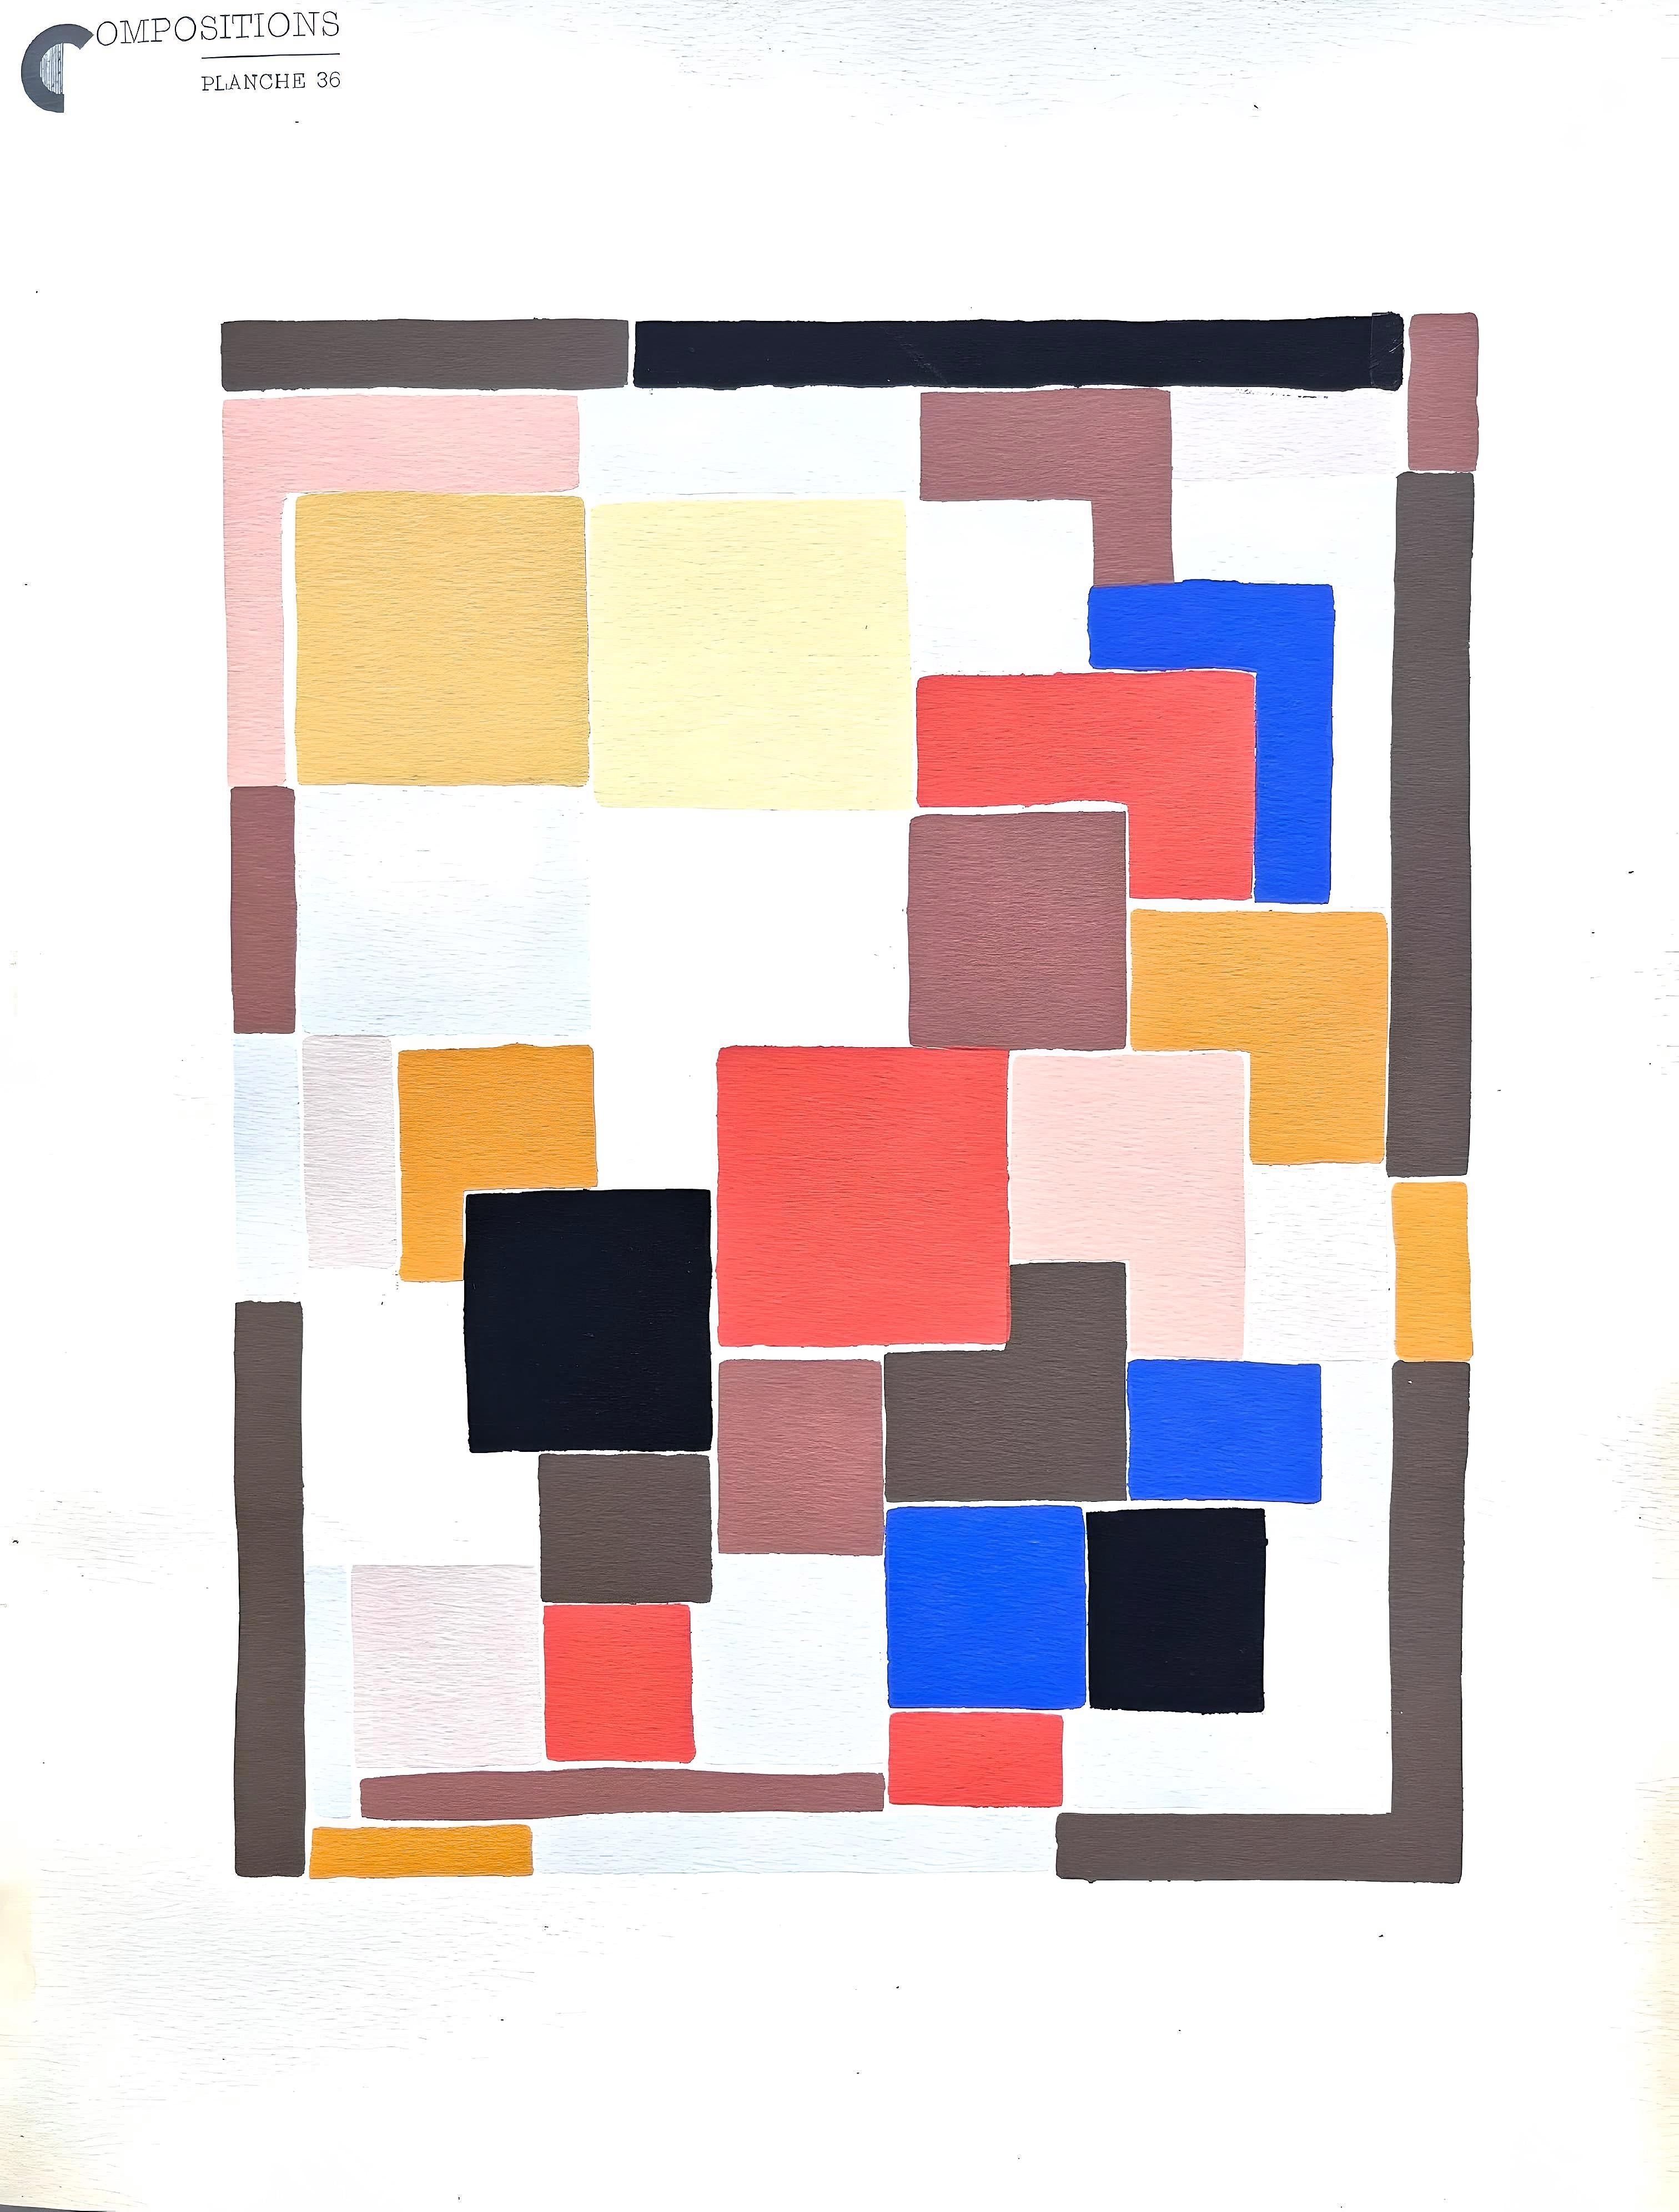 Delaunay, Planche No. 36, Compositions, couleurs, idées: Sonia Delaunay (after) For Sale 4